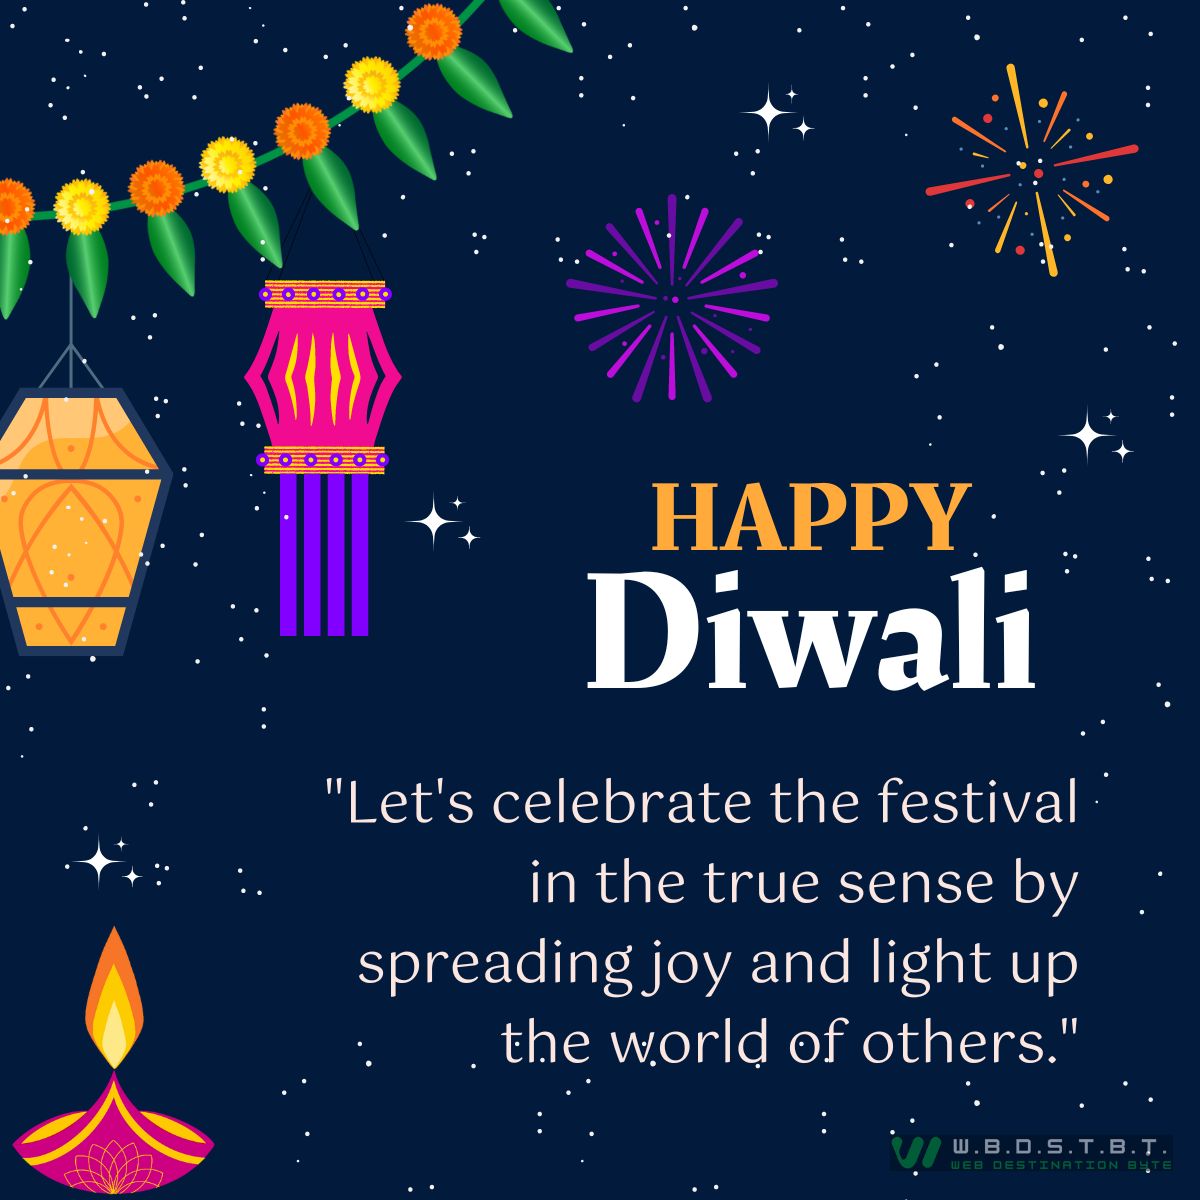 "Let's celebrate the festival in the true sense by spreading joy and light up the world of others."